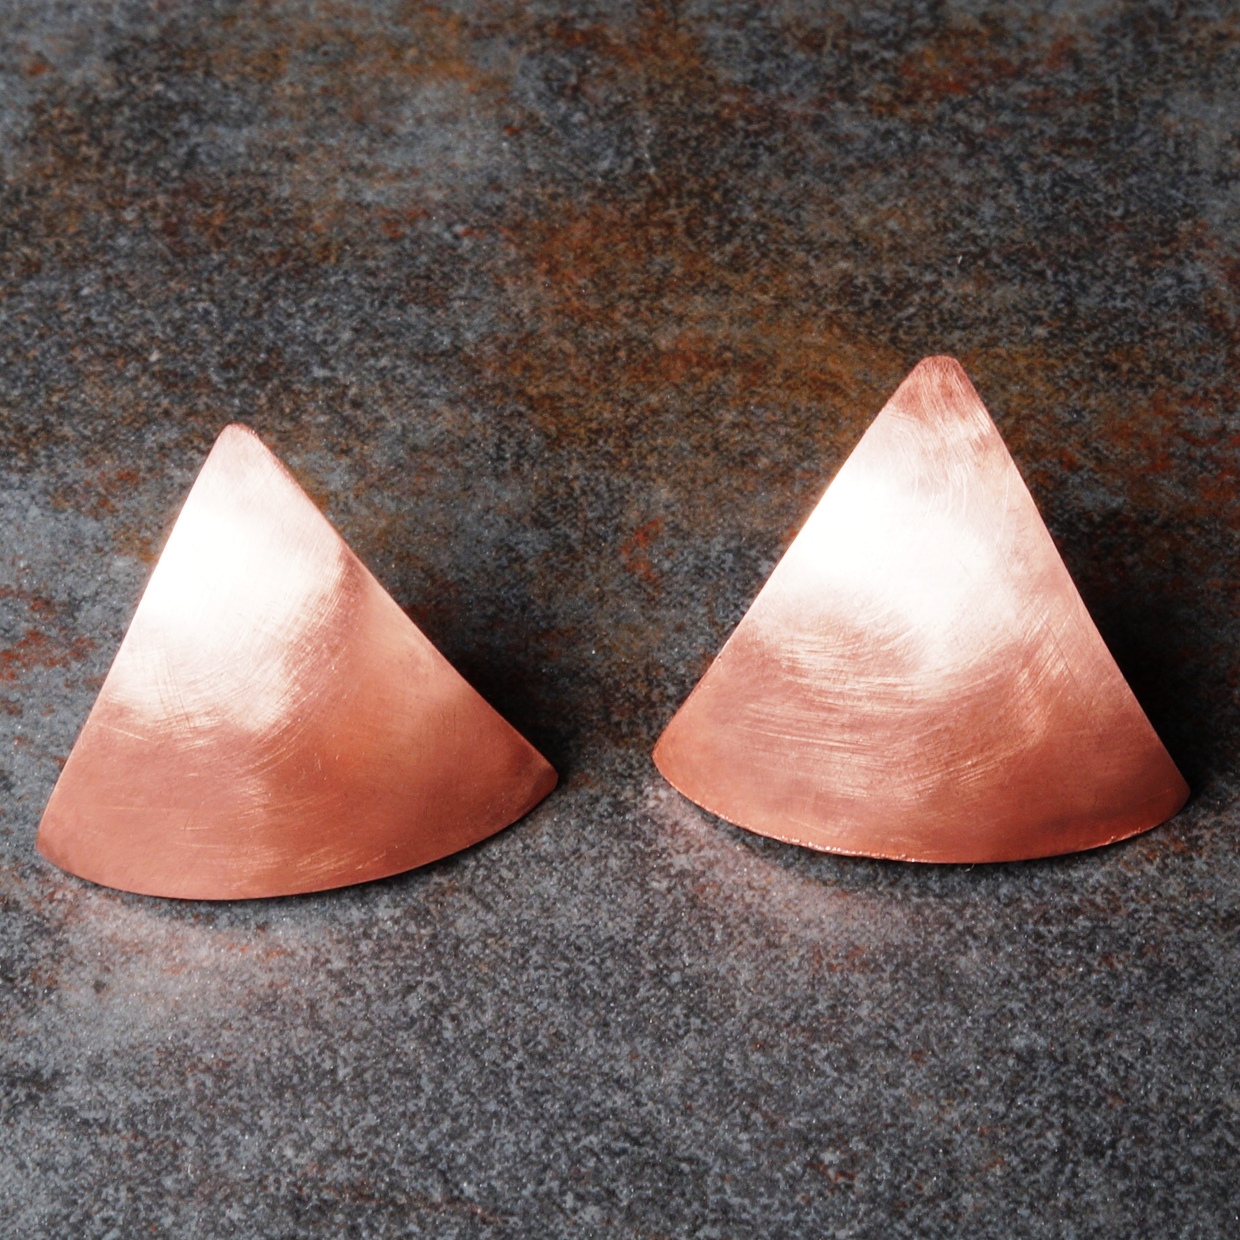 Handmade Copper Triangle Earrings with sterling silver posts